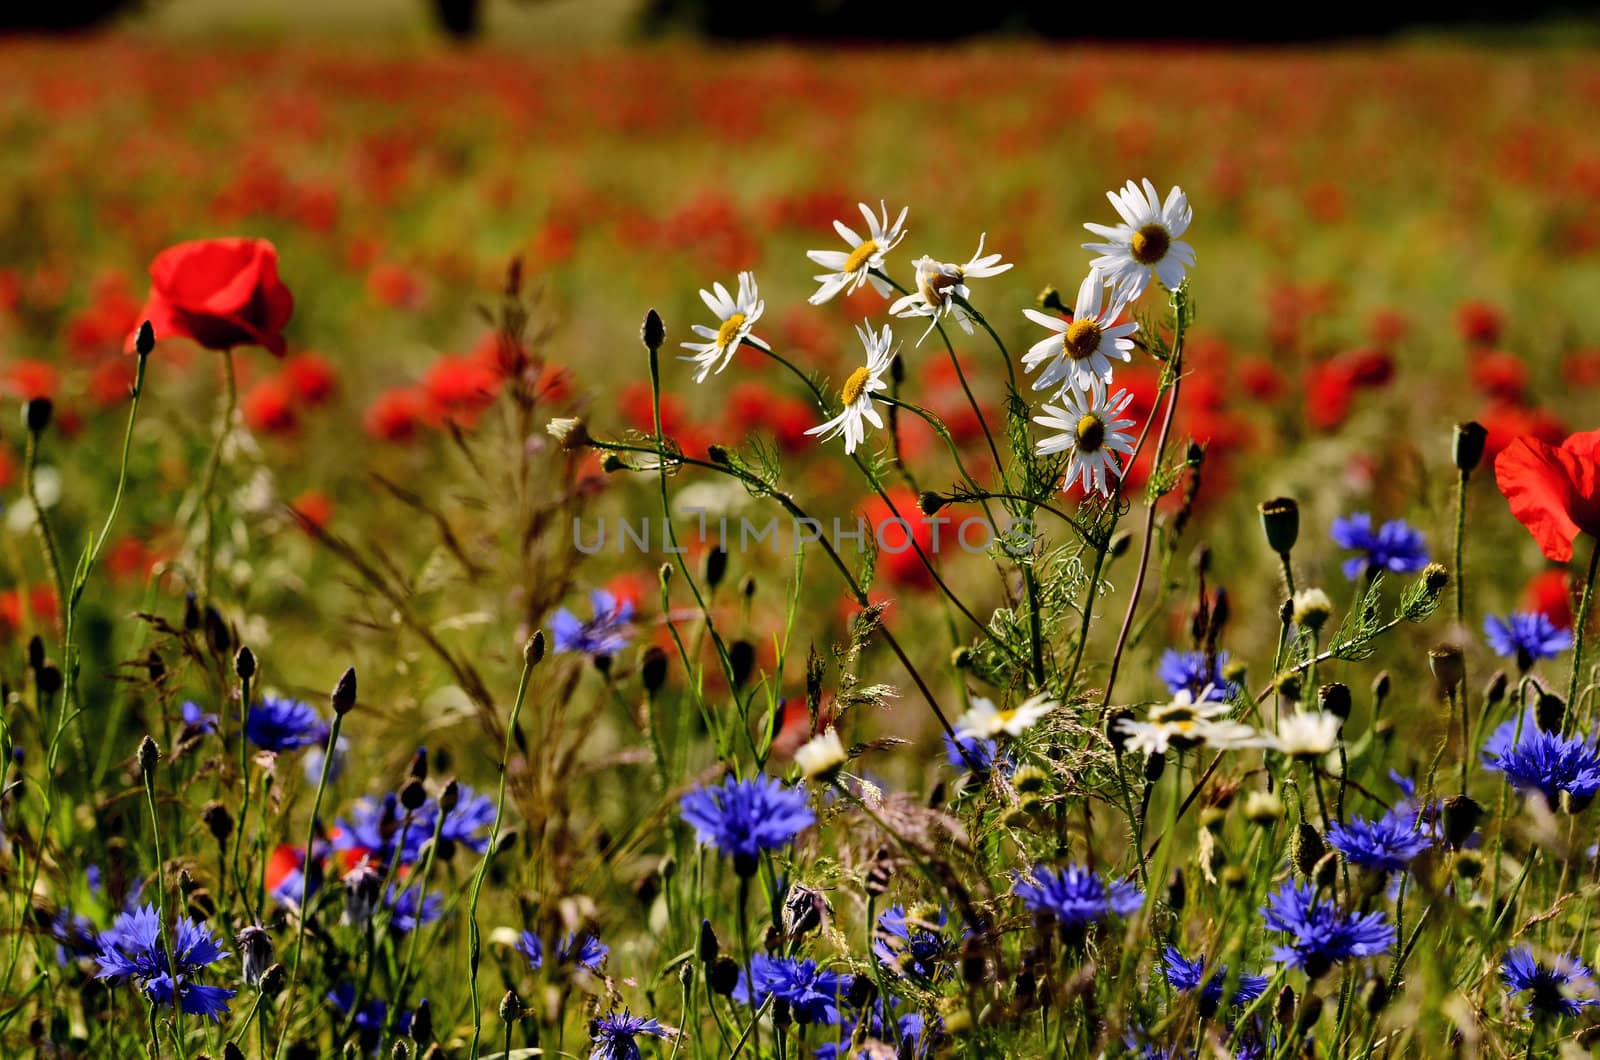 This photo present oxeye daisy cornflowers and poppies encircled a background field of poppies